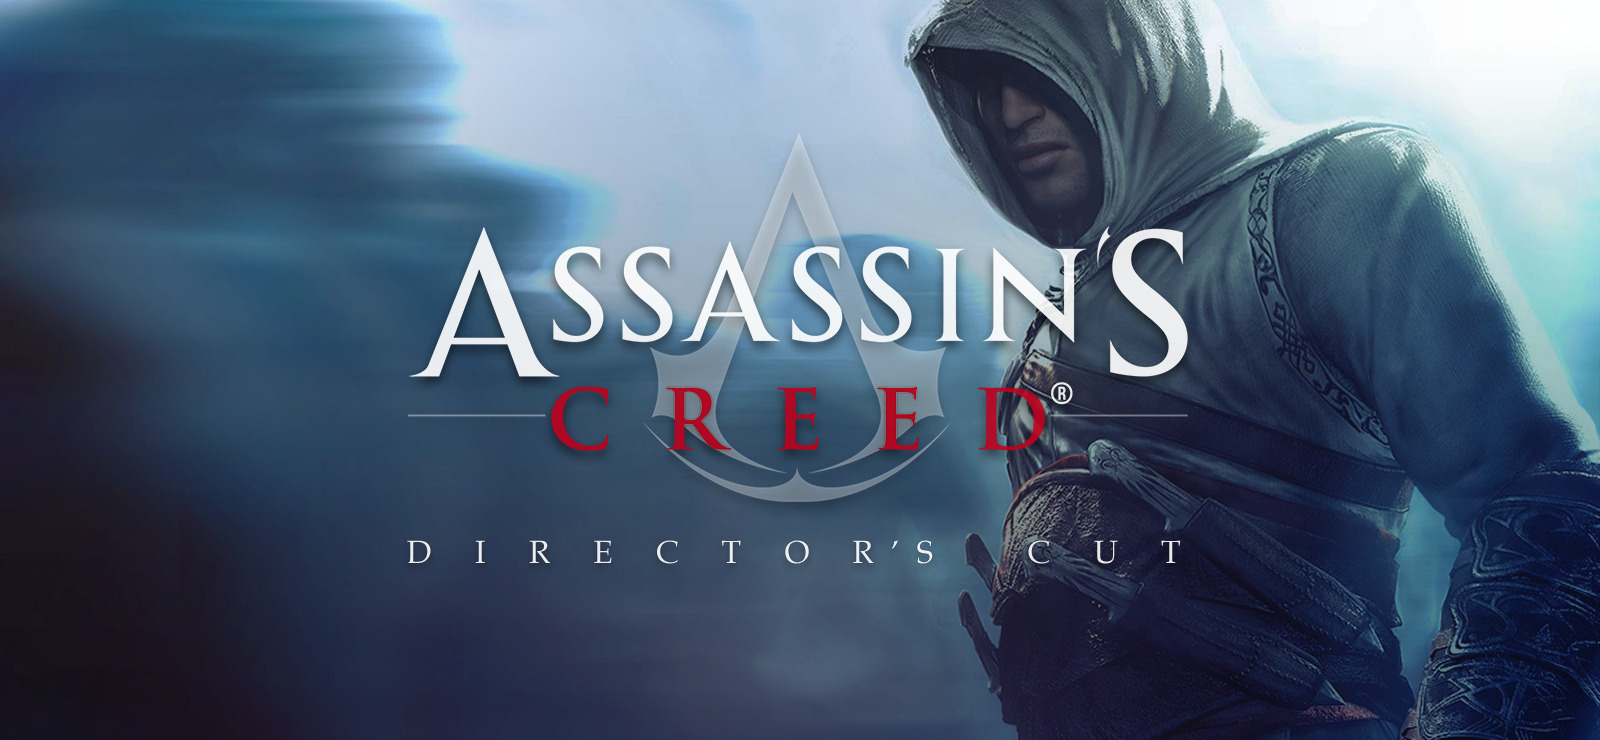 Assassin's Creed PC Digital Download: AC Director's Cut Edition $5, AC2 $5, Brotherhood $5, Revelations $6, The Lost Archive DLC $3 & More